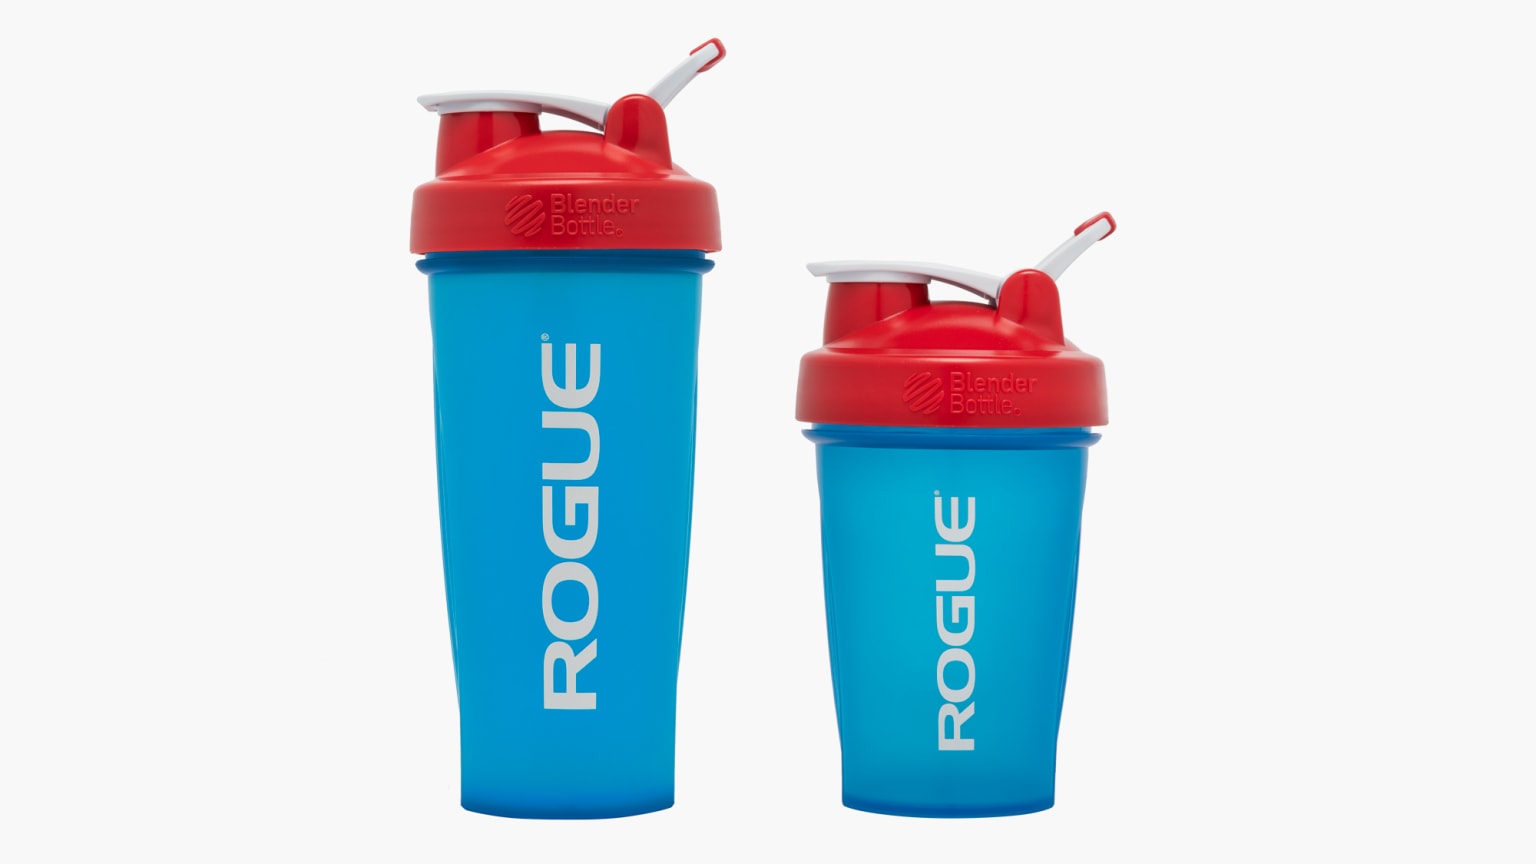 https://assets.roguefitness.com/f_auto,q_auto,c_limit,w_1536,b_rgb:f8f8f8/catalog/Gear%20and%20Accessories/Accessories/Shakers%20and%20Bottles/EU-BBBLUE/EU-BBBLUE-H_znnduc.png